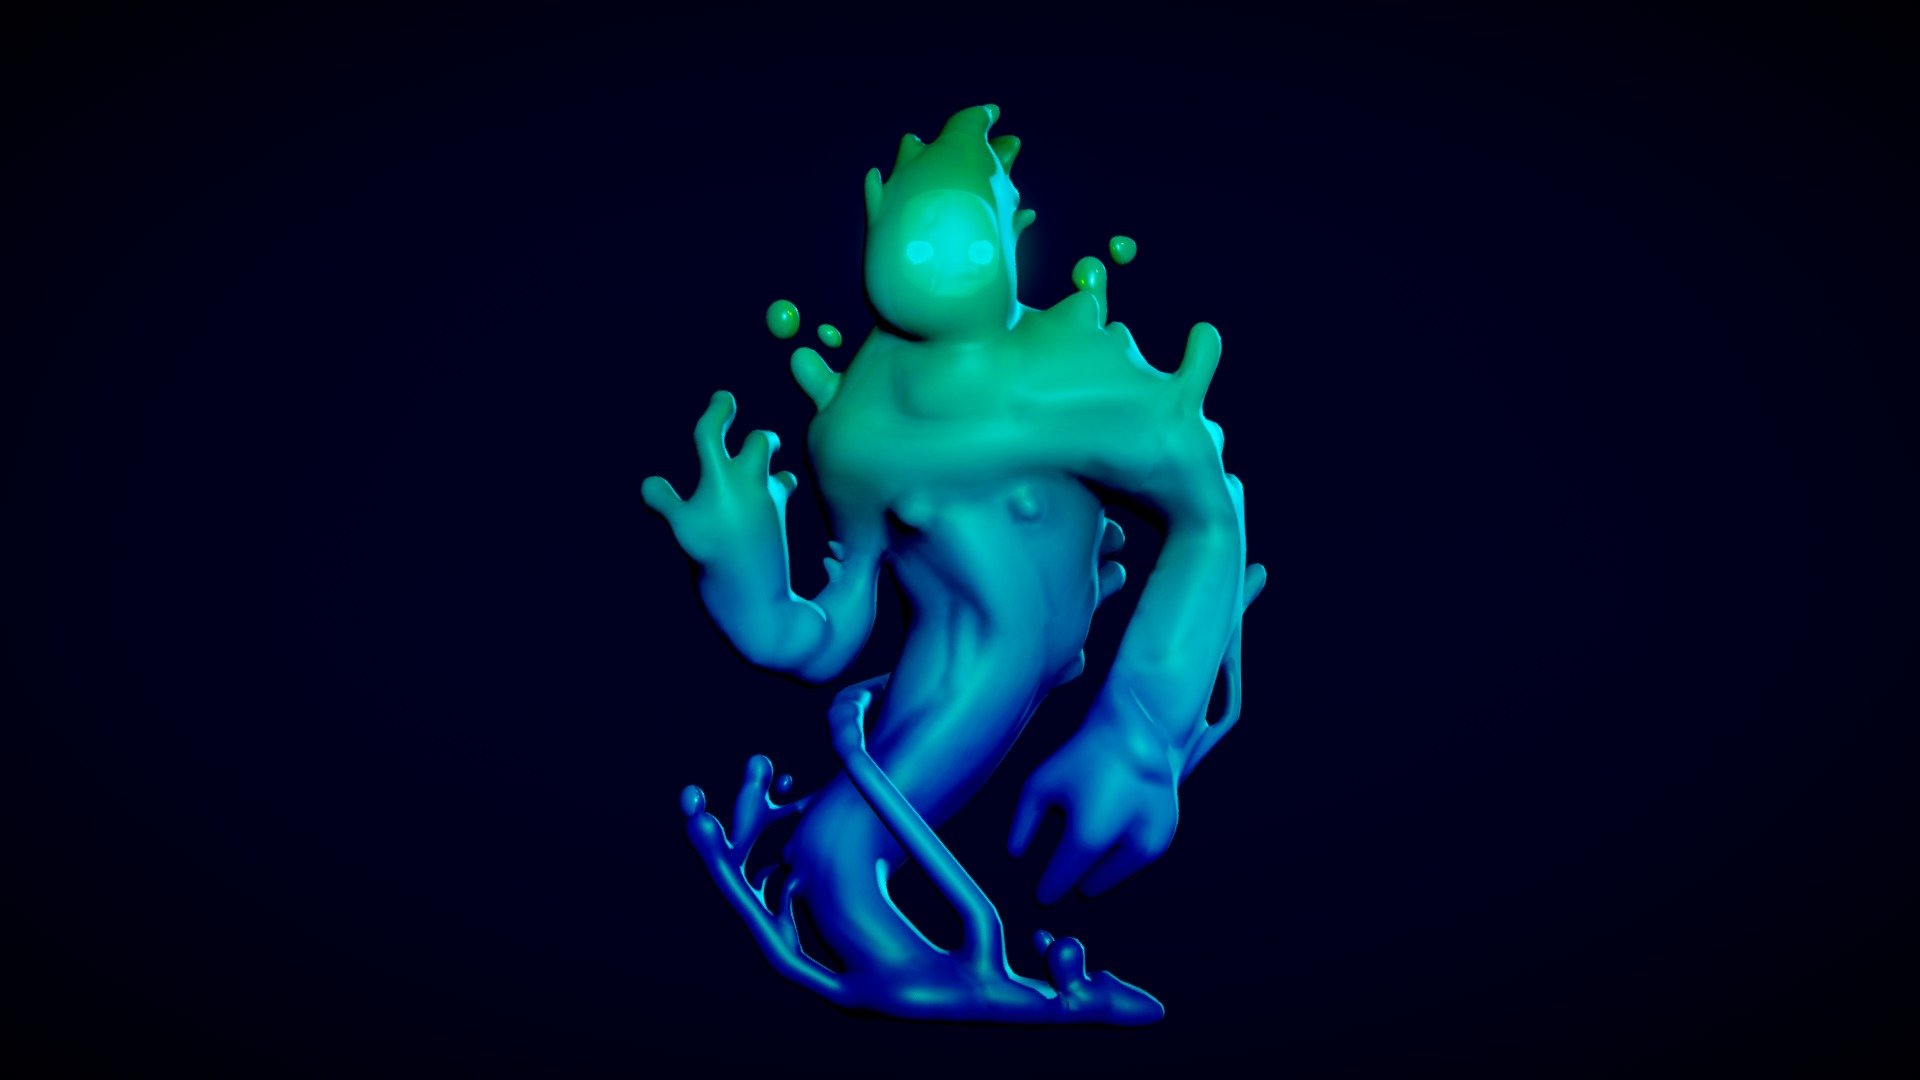 Quick Sculpt with lazy texturing on this one, but i like it :D Topic was &lsquo;'Liquid'&lsquo; for today and i always try to make some kind of creature. So here it is &hellip; a Haunting Water Ghost :x - Water Wrath - Day 11 - 3D model by Asha Basha (@Kaini) 3d model